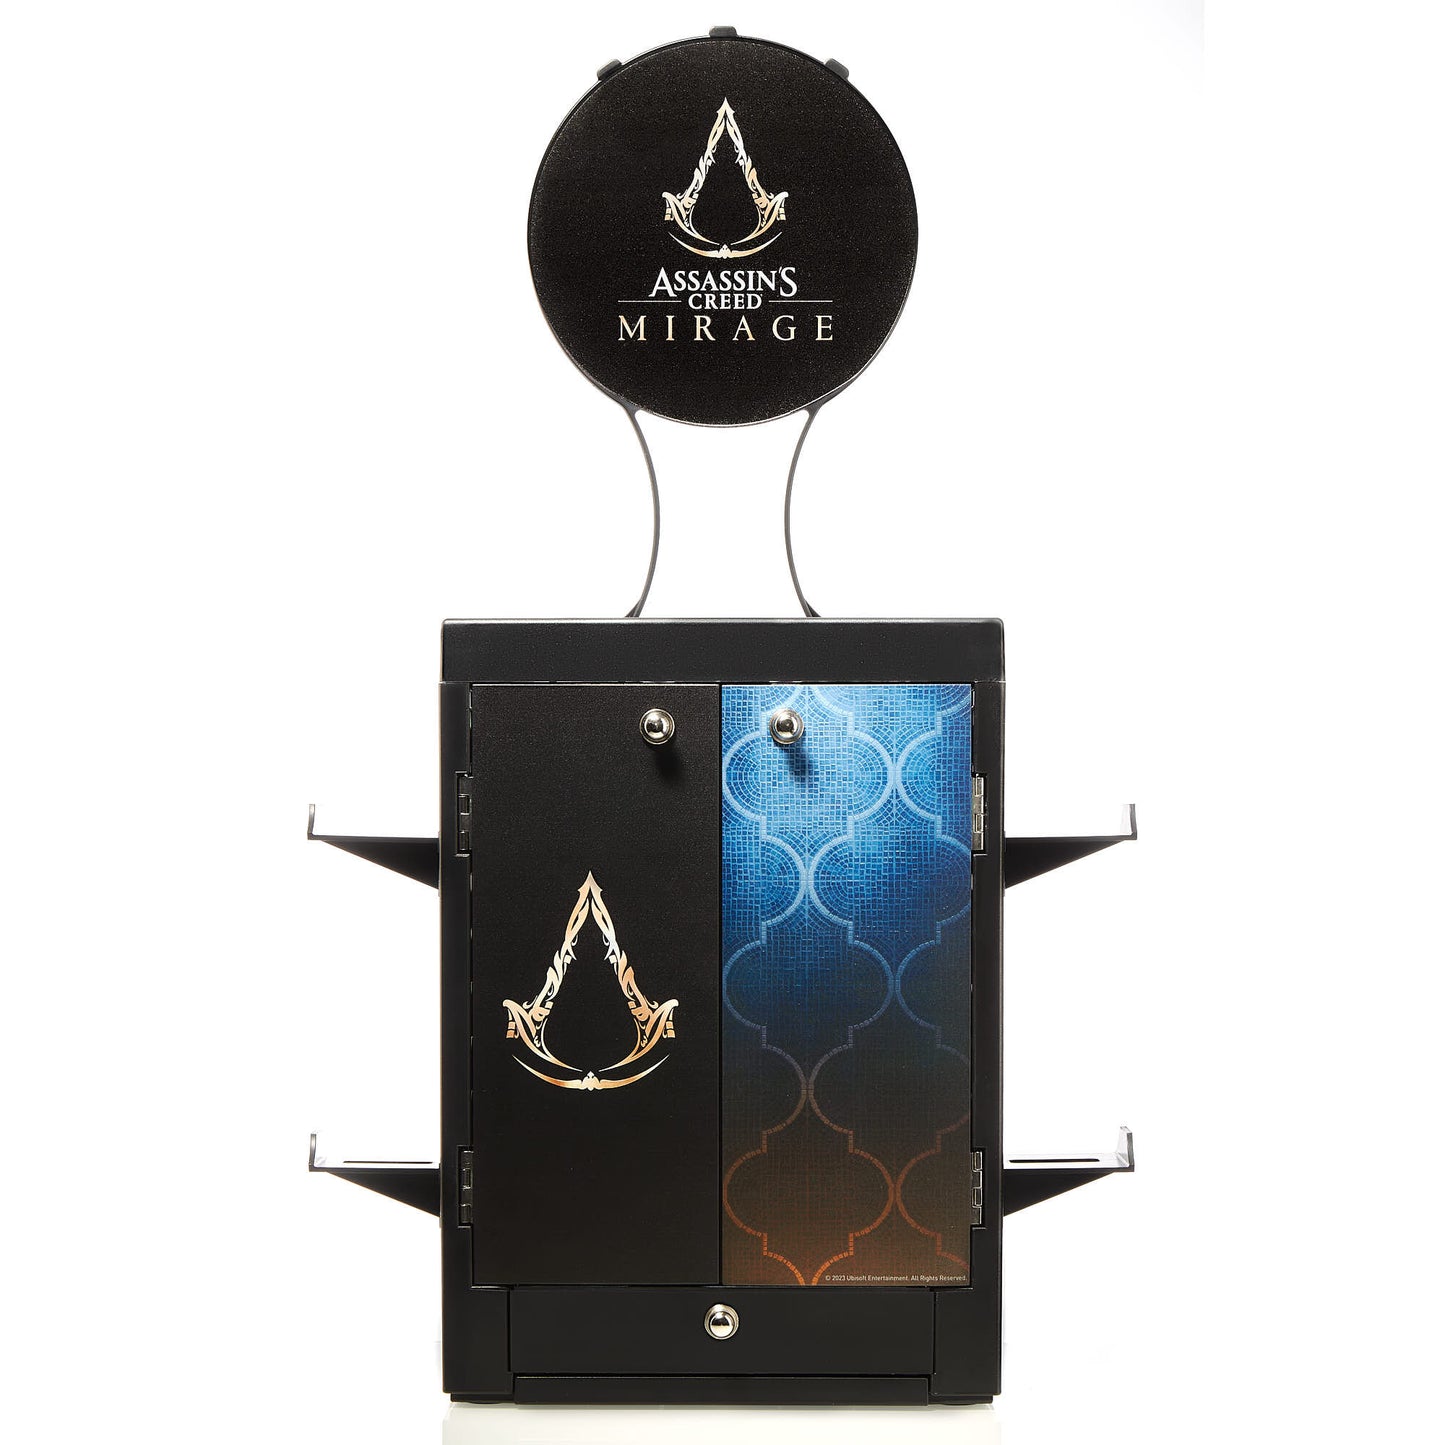 ASSASSIN'S CREED UFFICIALE - MIRAGE GAMING LOCKER